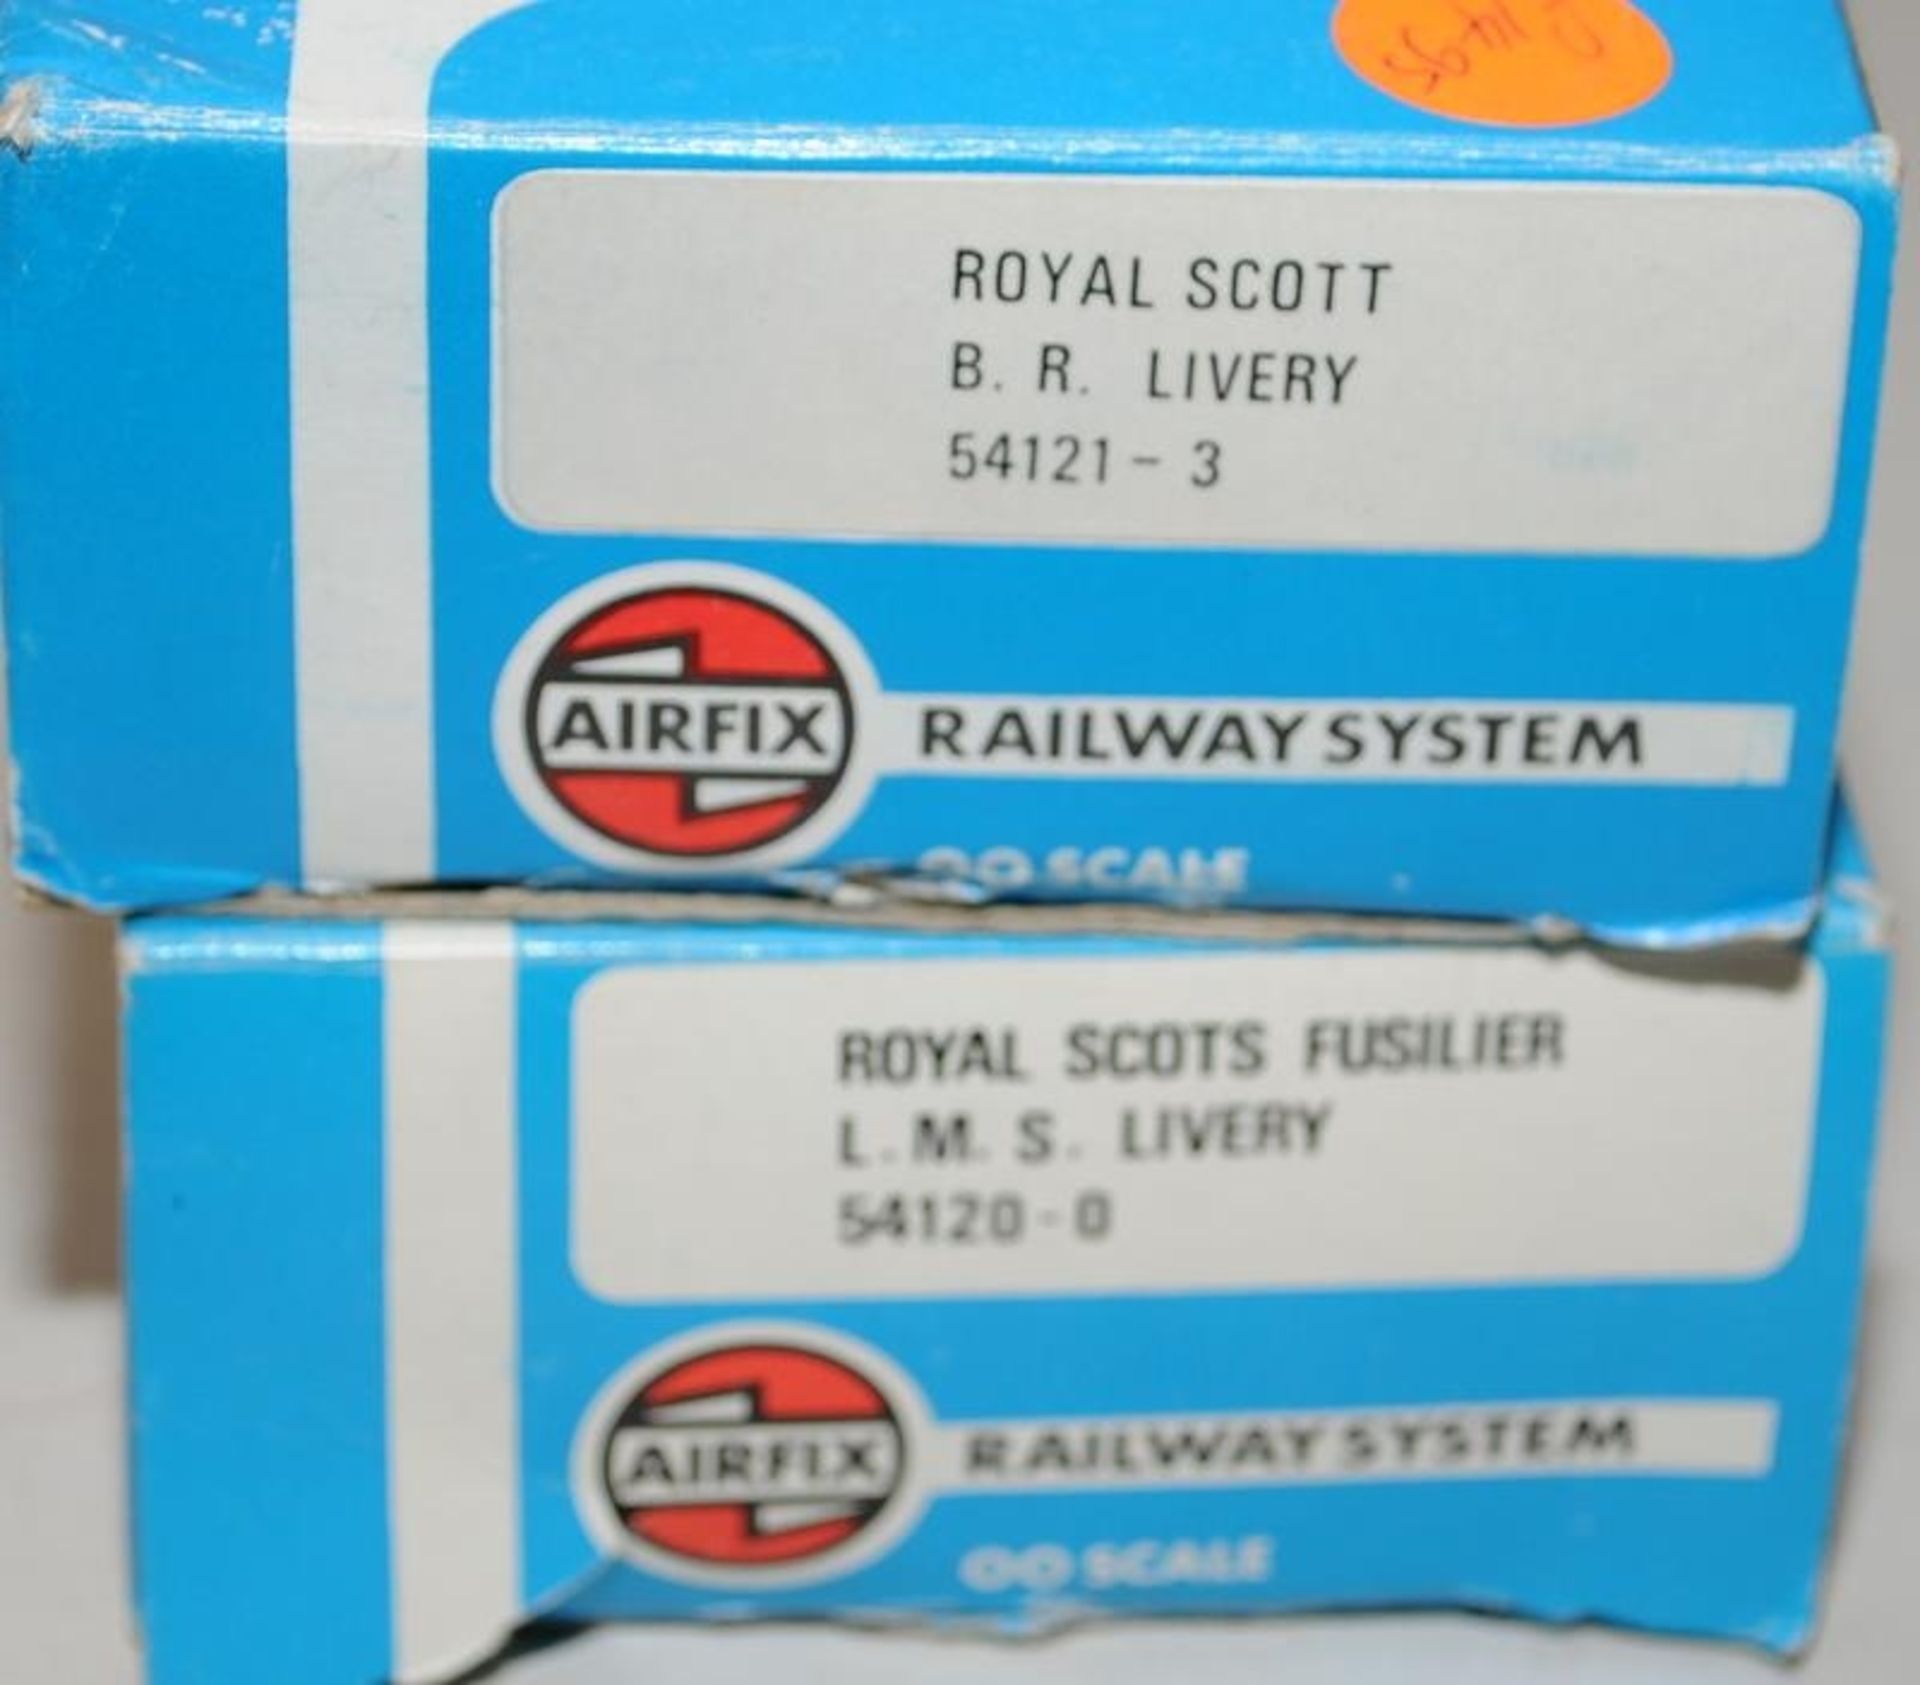 Airfix OO gauge Royal Scot Locomotive and Tender ref:54121-3 c/w Royal Scots Fusilier ref:54120-0. - Image 2 of 2